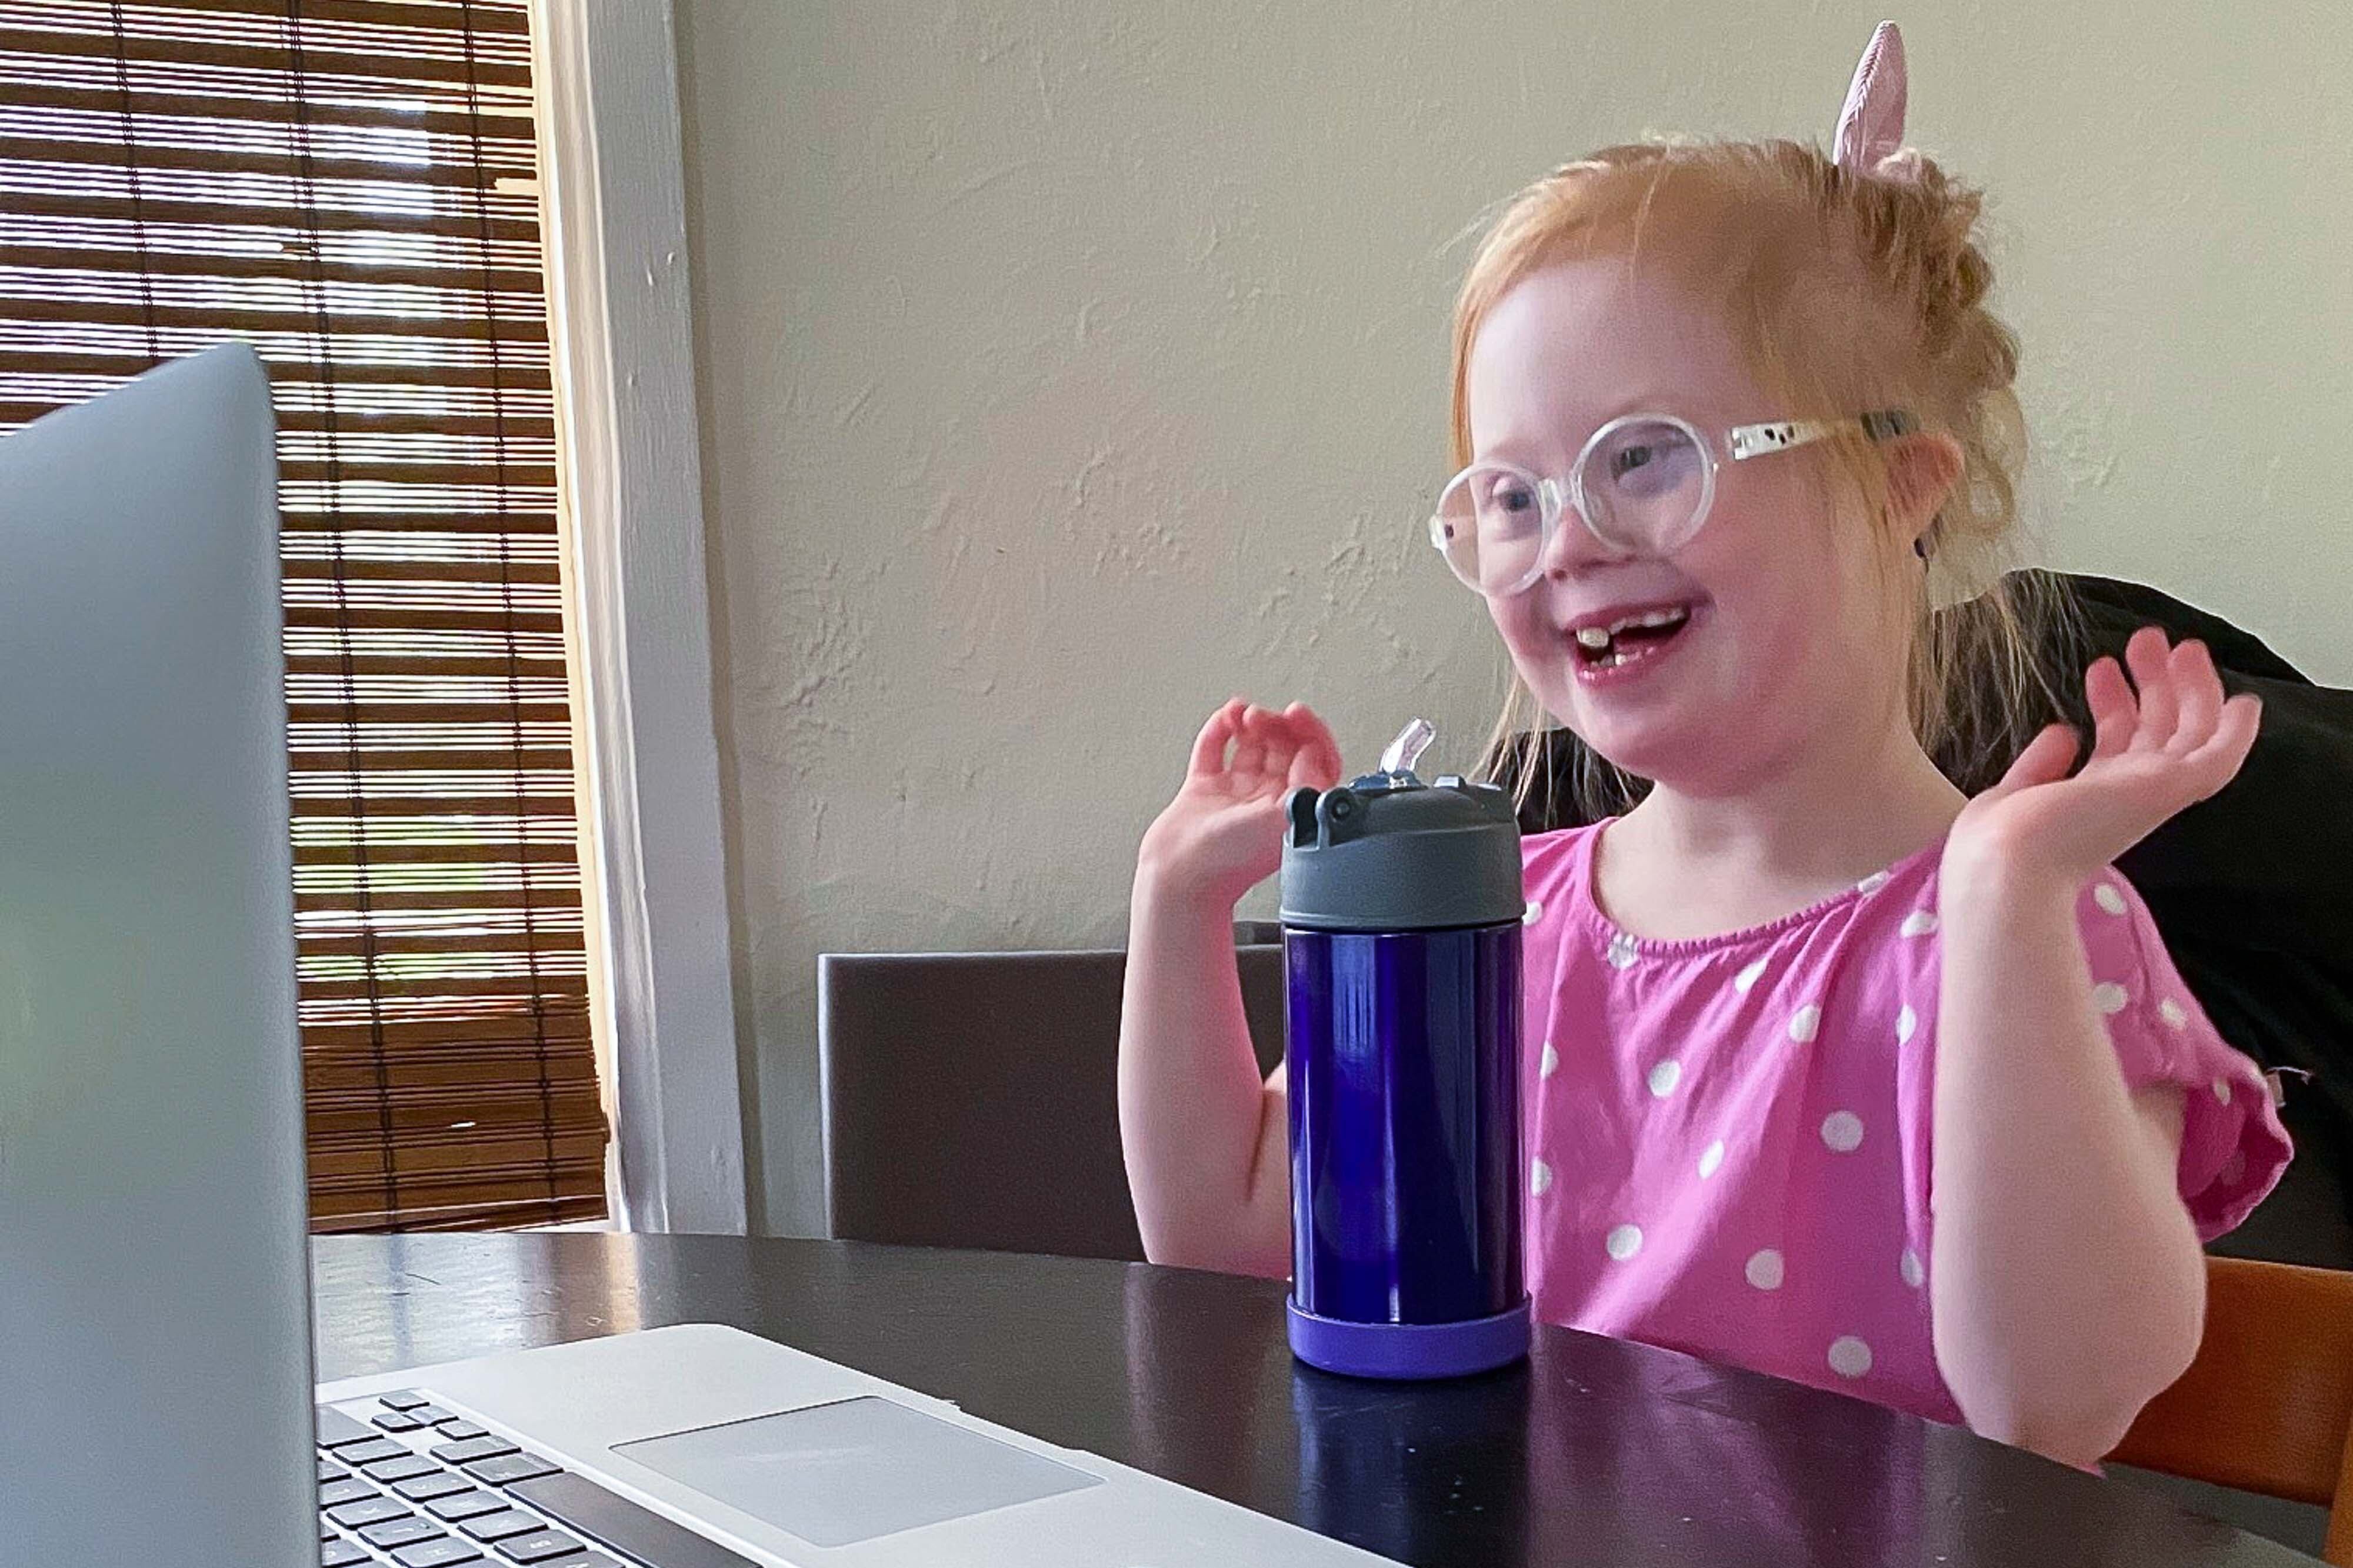 A little girl with Down syndrome smiles while looking at a computer screen. She has red hair and is wearing a pink polka-dotted shirt.